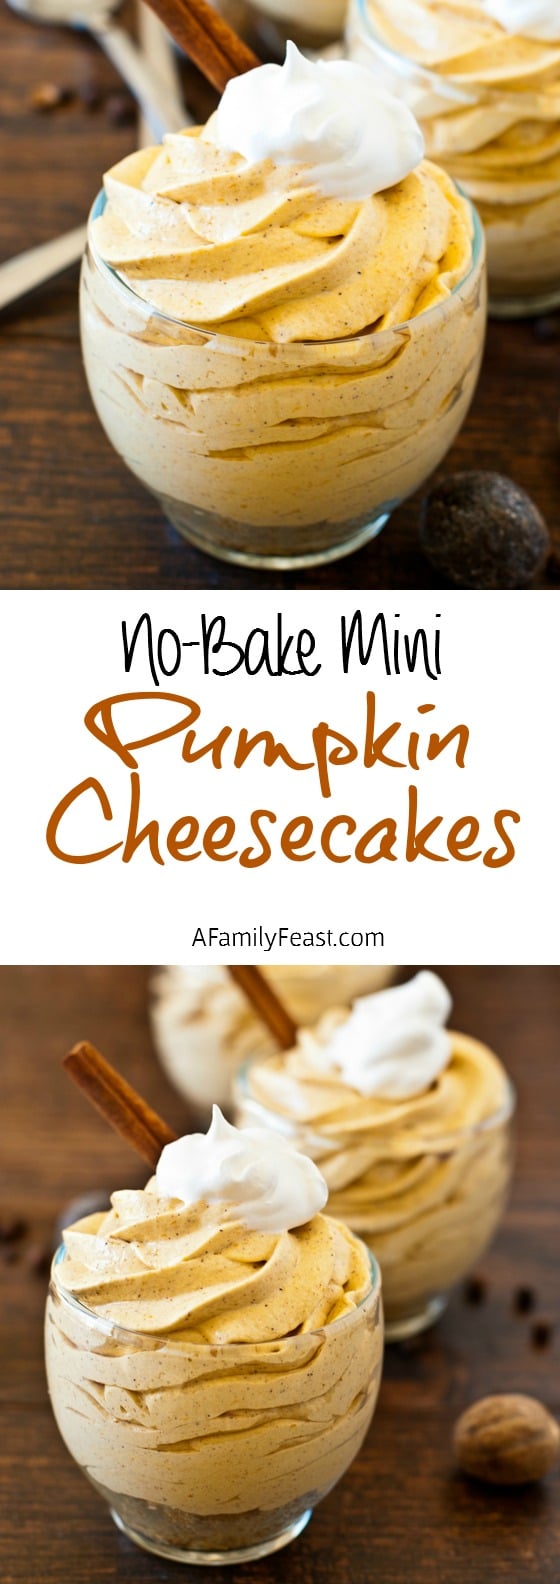 No Bake Mini Pumpkin Cheesecakes - So simple to make and so delicious! (There's a good reason this recipe has been pinned over 300,000 times!)